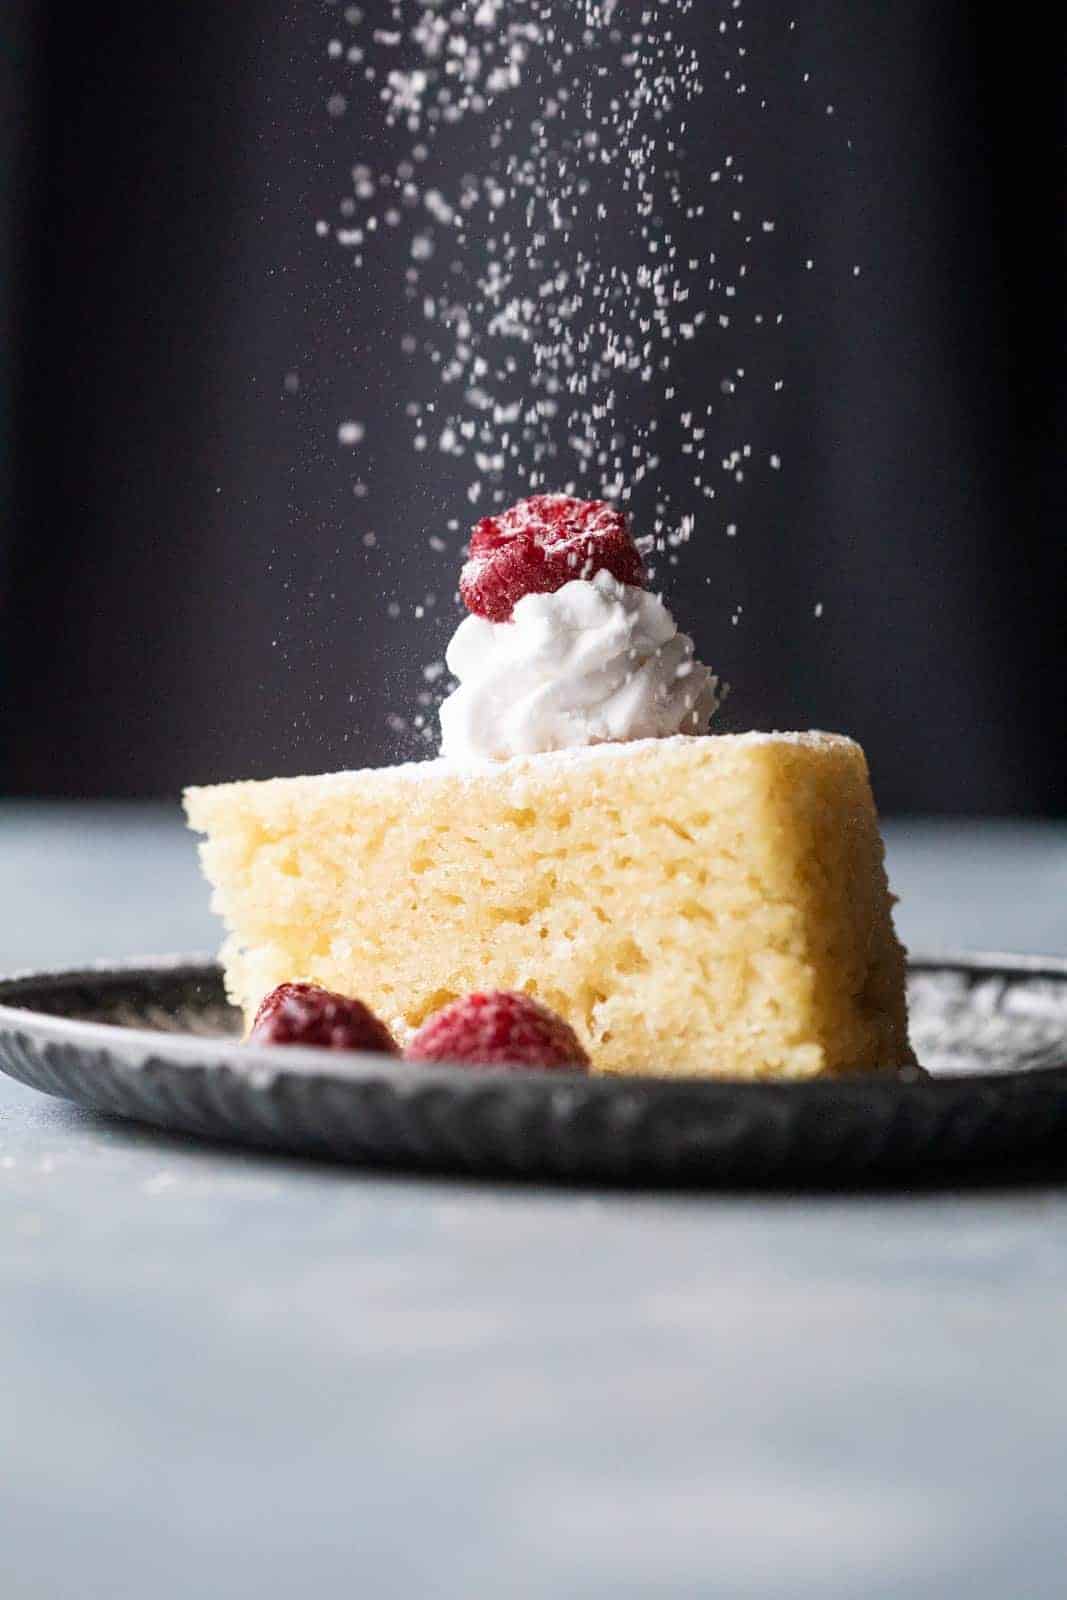 A slice of eggless vanilla cake with whipped cream, raspberries and a sprinkling of icing sugar